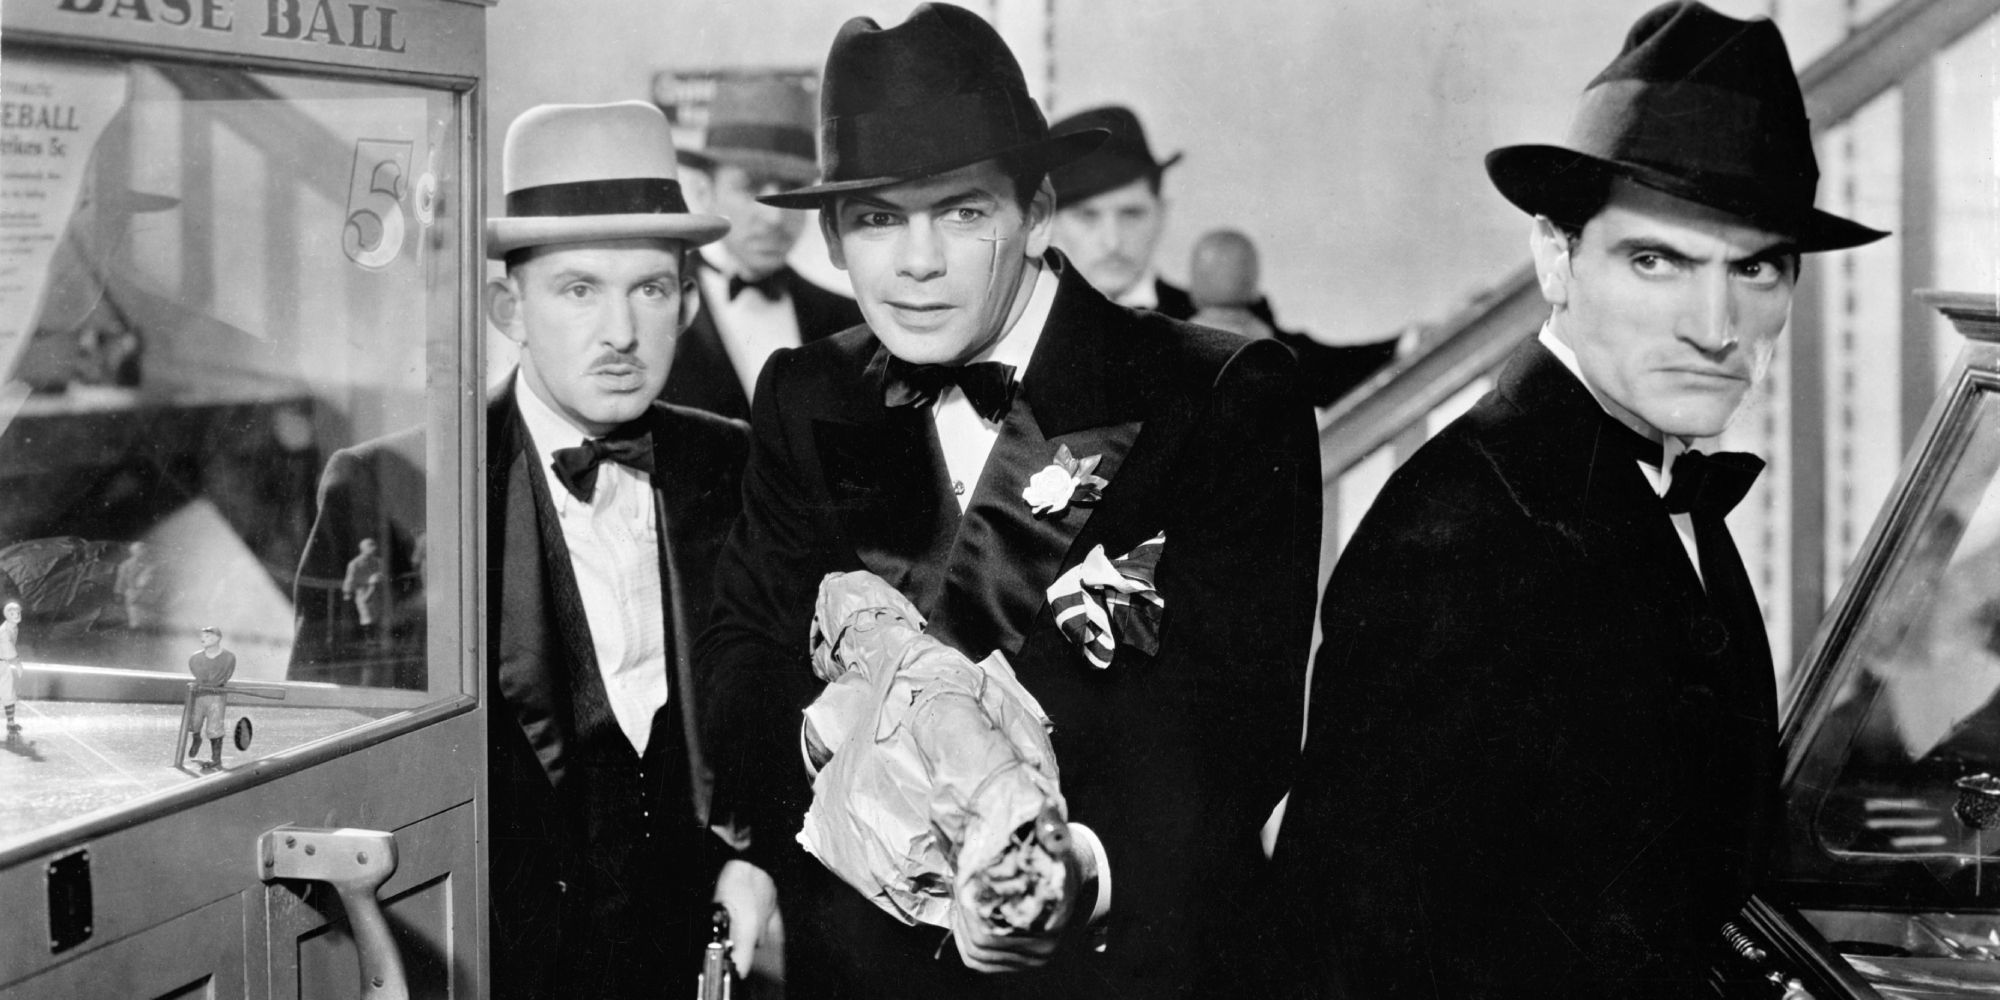 Paul Muni as Tony Camonte in Scarface, Surrounded by Men - 1932